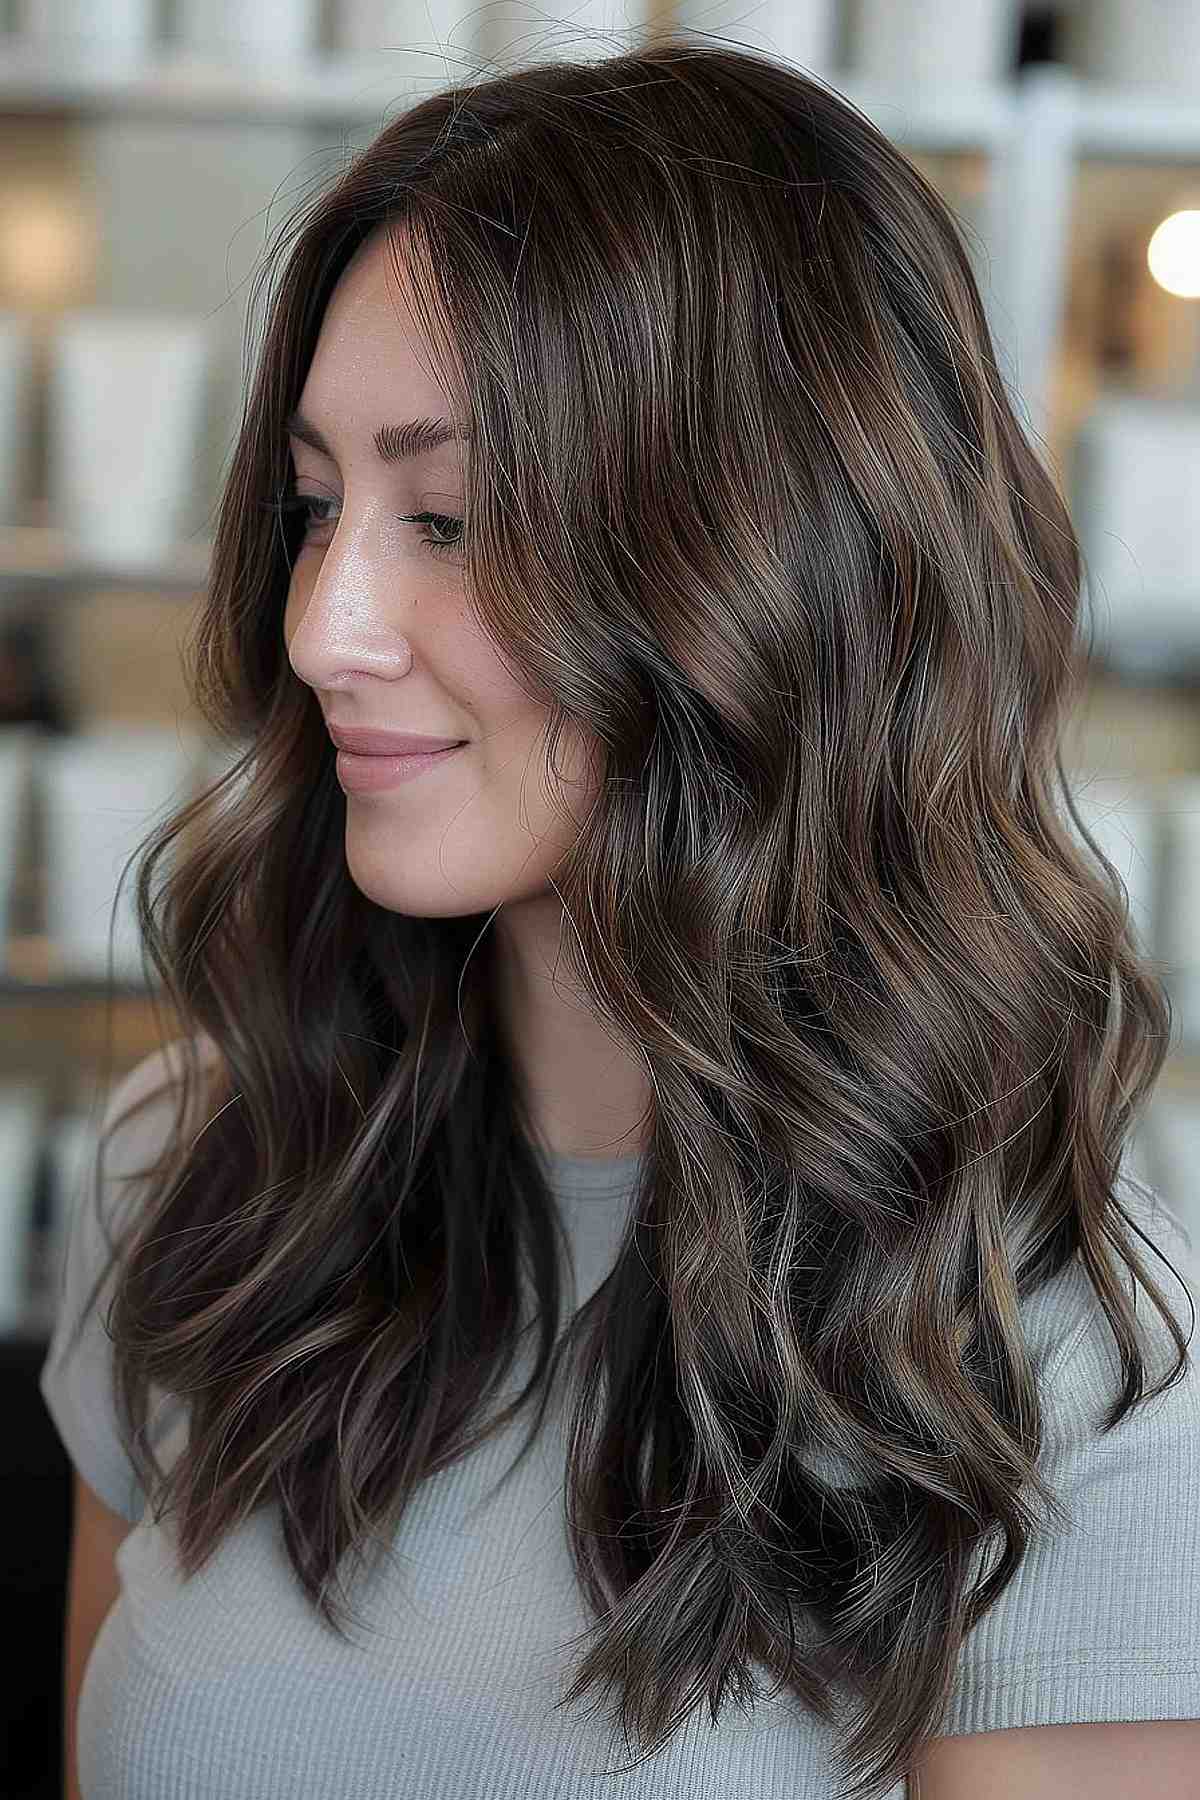 Medium-length wavy hair in a mushroom brown color, styled with volume and movement for an effortlessly chic look.